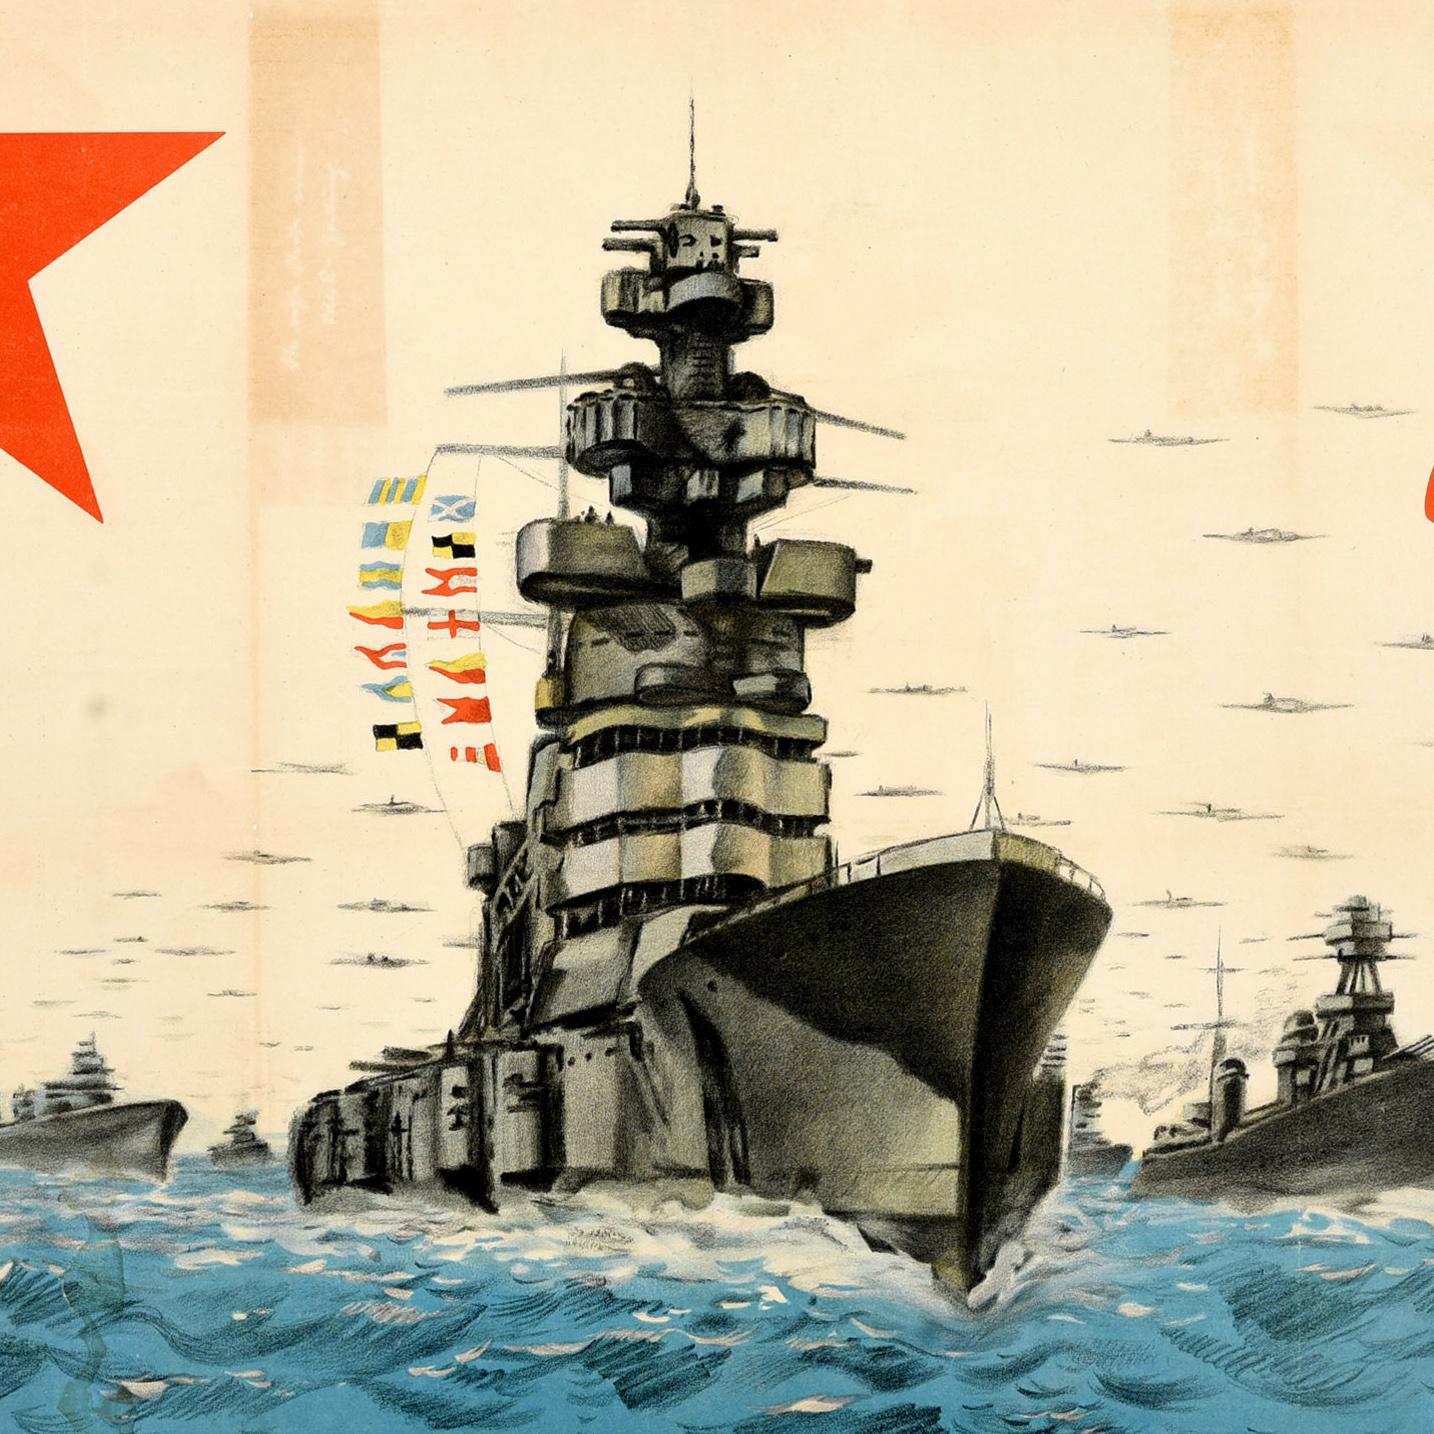 Original vintage Soviet World War Two propaganda poster - Long Live the Powerful Navy of the USSR / Да Здравствует Мощный Военно-морской Флот Ссср! - featuring a naval image of a fleet of warships at sea with military planes flying overhead, a red